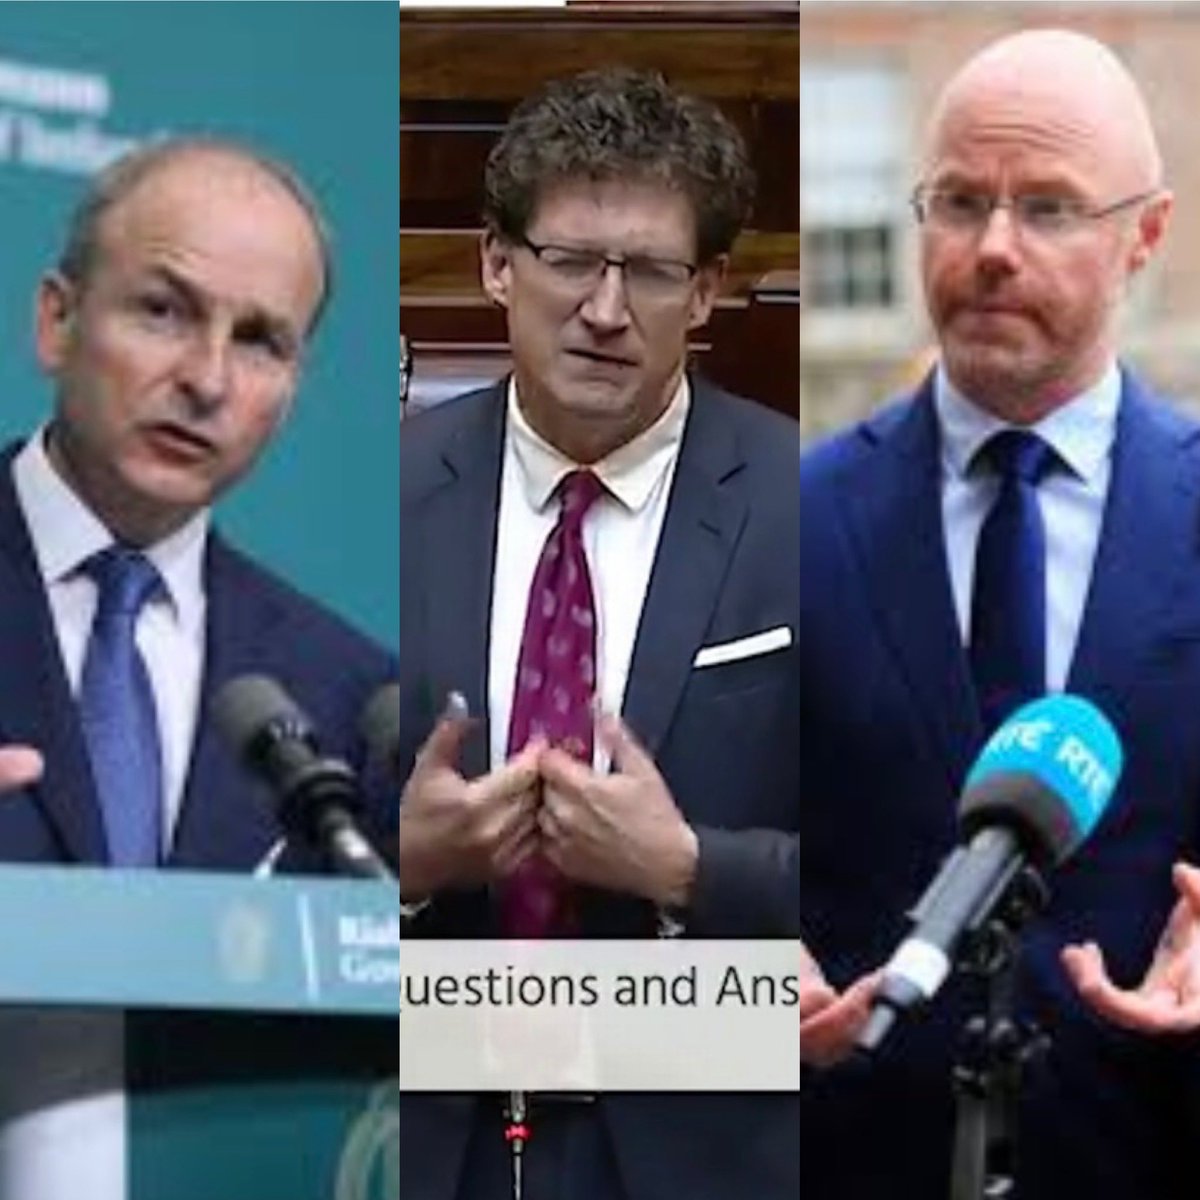 The three horsemen of the patriarchy telling us not to ask question about the details of the #NMH deal and that instead we should just ‘trust’ them is PEAK disrespectful misogyny from the government

Utterly shameful

#makeNMHOurs @OurMatHosp #DitchDonnellysDeal #sexisminpolitics